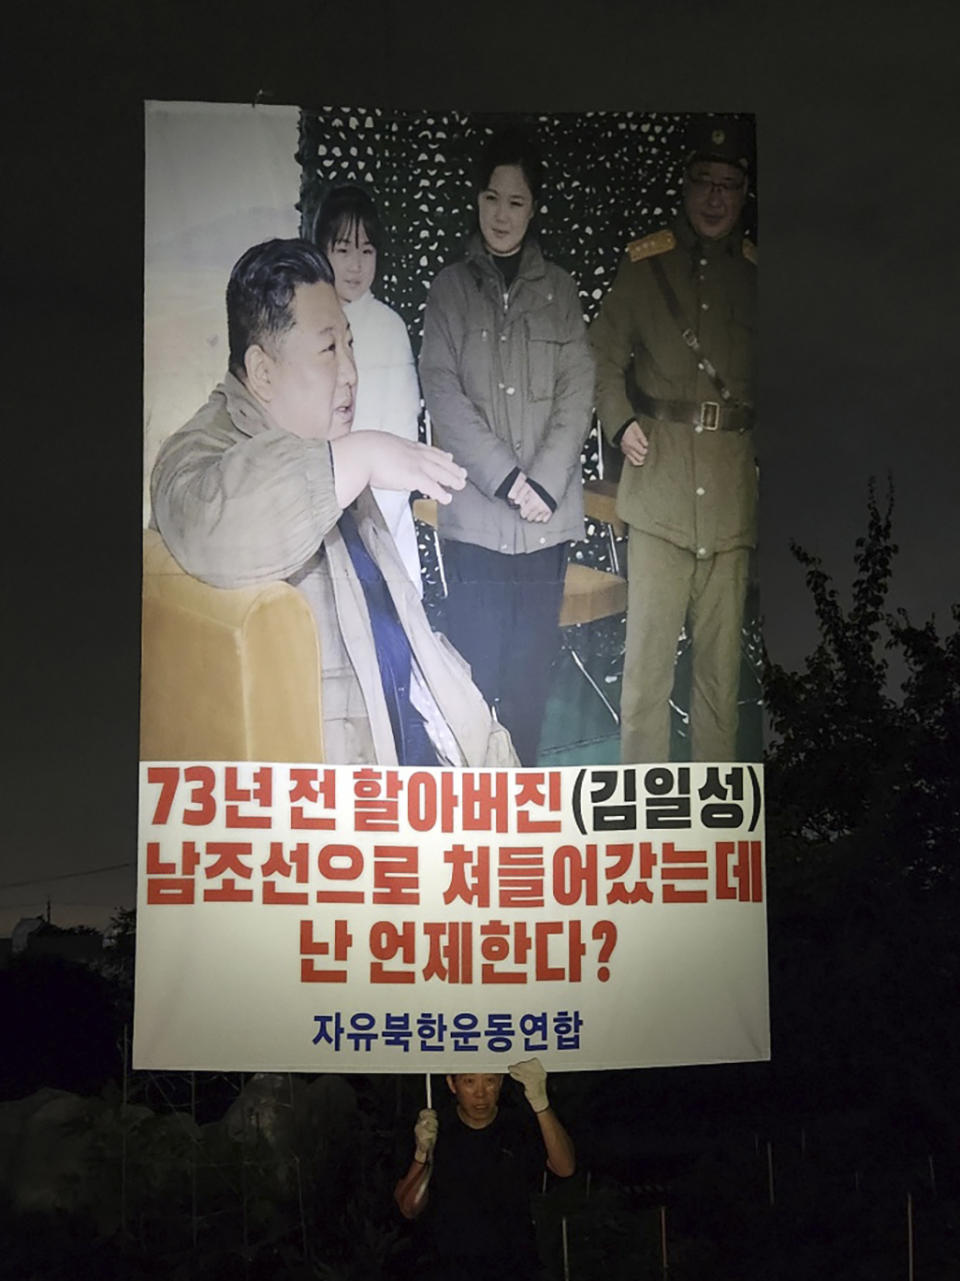 In this photo provided by Fighters For A Free North Kore, North Korean defector Park Sang-hak holds a banner showing an image of North Korean leader Kim Jong Un, left, his wife Ri Sol Ju, second from right, and his daughter, second from left, attached to one of the balloons to mark the 73rd anniversary of the outbreak of the Korean War, at Gimpo, South Korea, Sunday, June 25, 2023. The signs read "My grandfather (Kim Il Sung) invaded South Korea 73 years ago. When should I do the same?" (Fighters For A Free North Korea via AP).